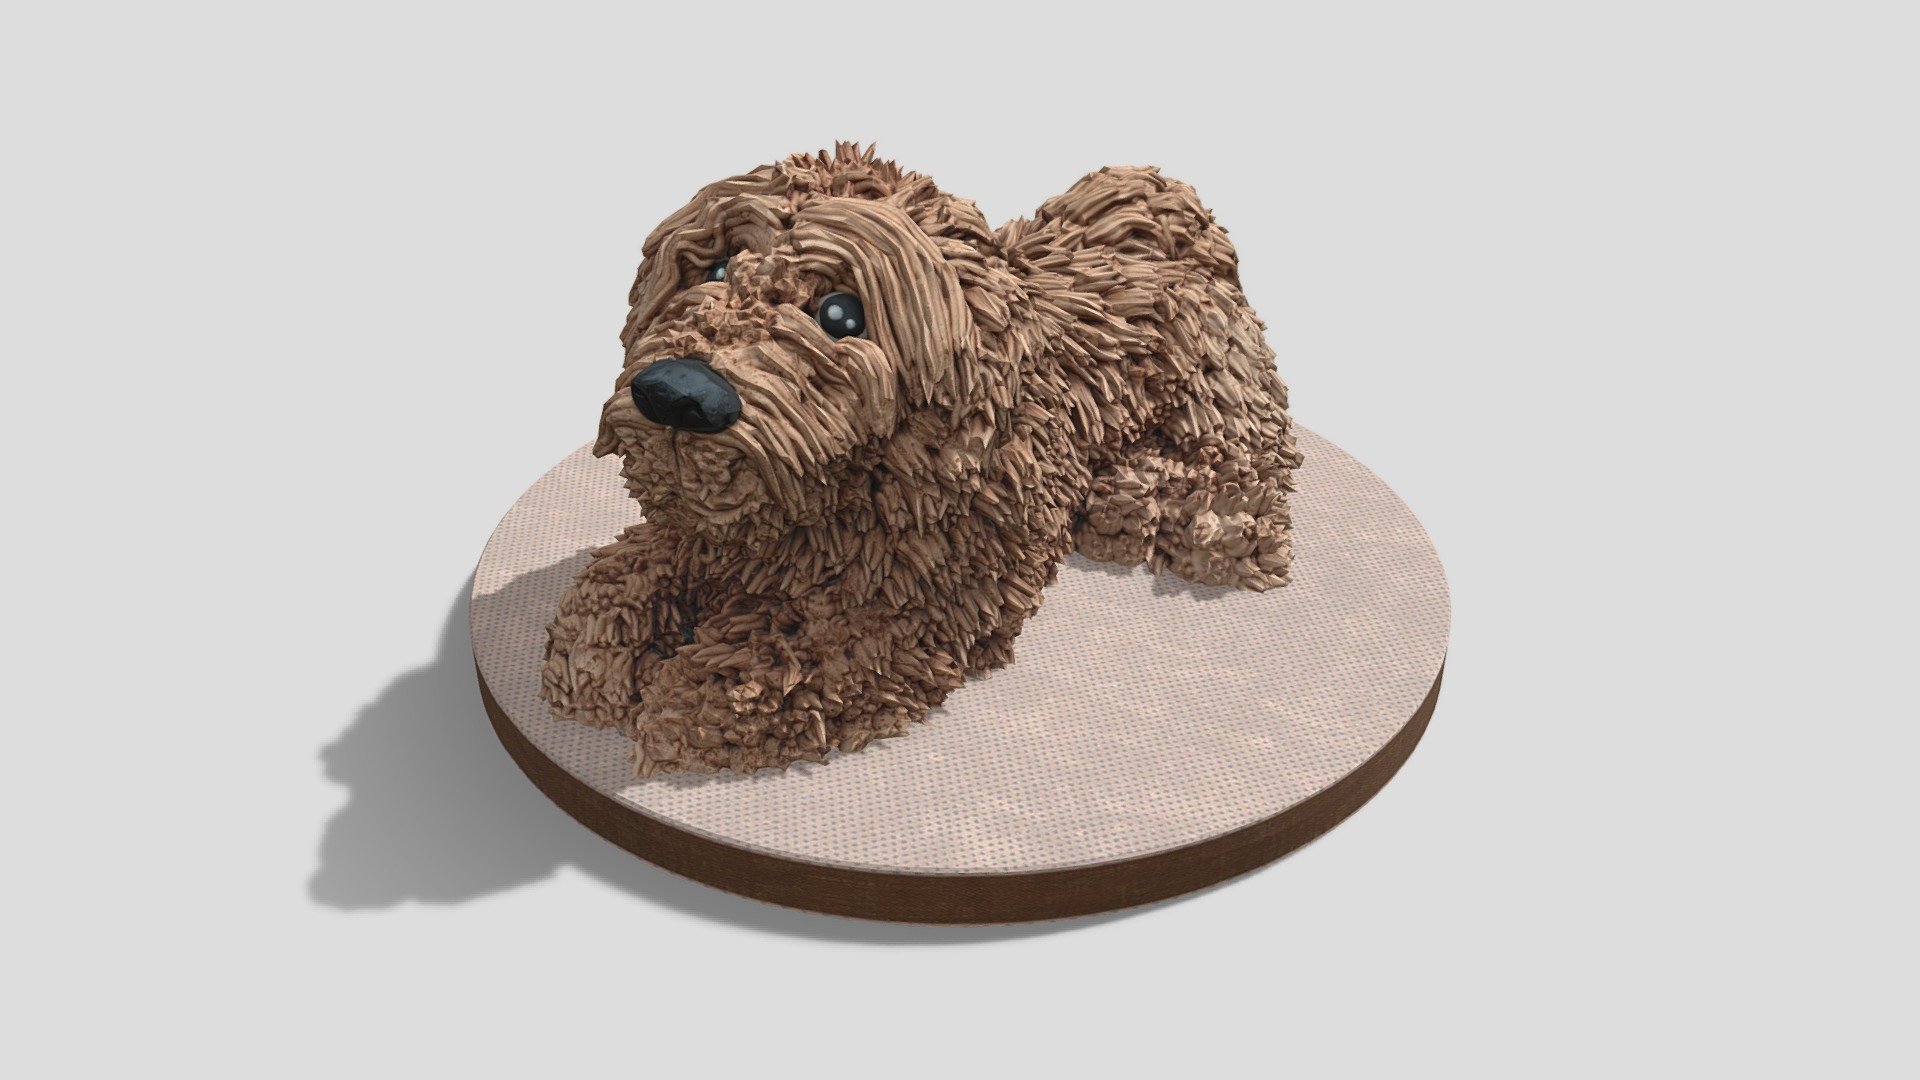 This Buttercream Cockapoo Dog Cake model was created using photogrammetry which is made by CAKESBURG Premium Cake Shop in the UK. You can purchase real cake from this link: https://cakesburg.co.uk/products/cockapoo-dog-cake?_pos=4&amp;_sid=ead16bb57&amp;_ss=r

Textures 4096*4096px PBR photoscan-based materials Base Color, Normal Map, Roughness) - Cockapoo Dog Cake - Buy Royalty Free 3D model by Cakesburg Premium 3D Cake Shop (@Viscom_Cakesburg) 3d model